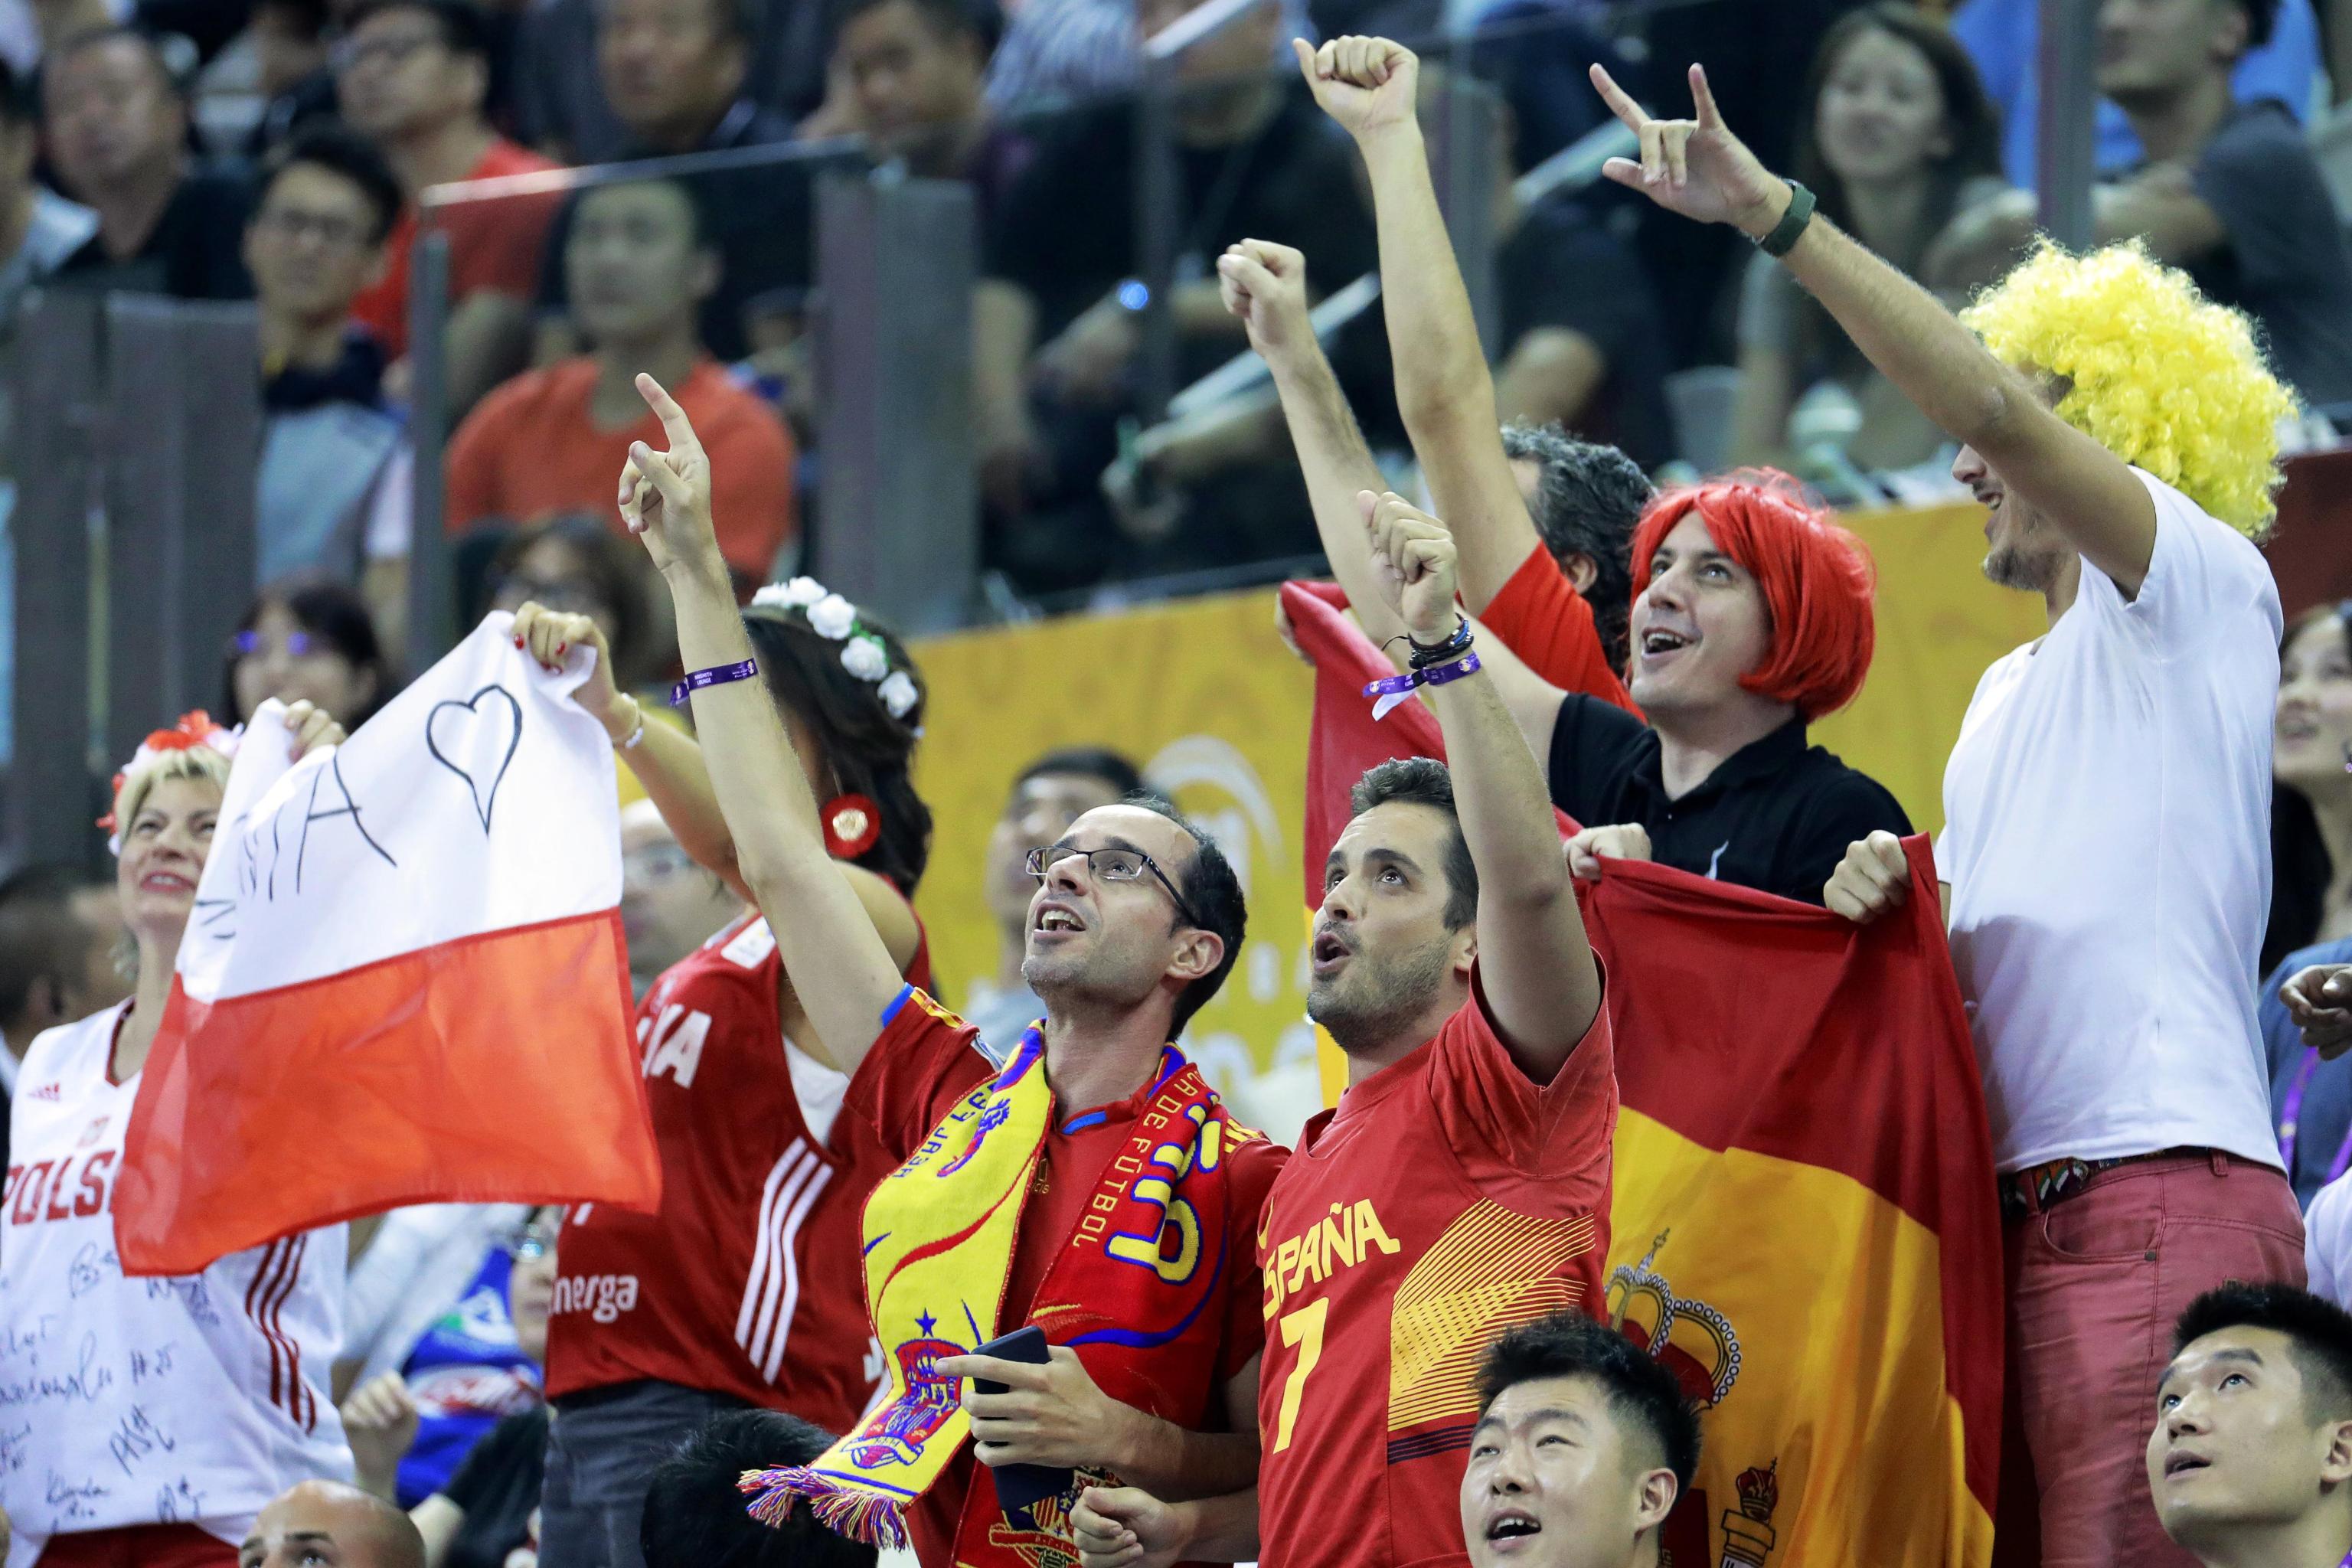 epa07832508 Fans of Poland (L) and Spain (R) cheer during the FIBA Basketball World Cup 2019 quarter finalâ match between Spain and Poland in Shanghai, China, 10 September 2019.  EPA/WU HONG